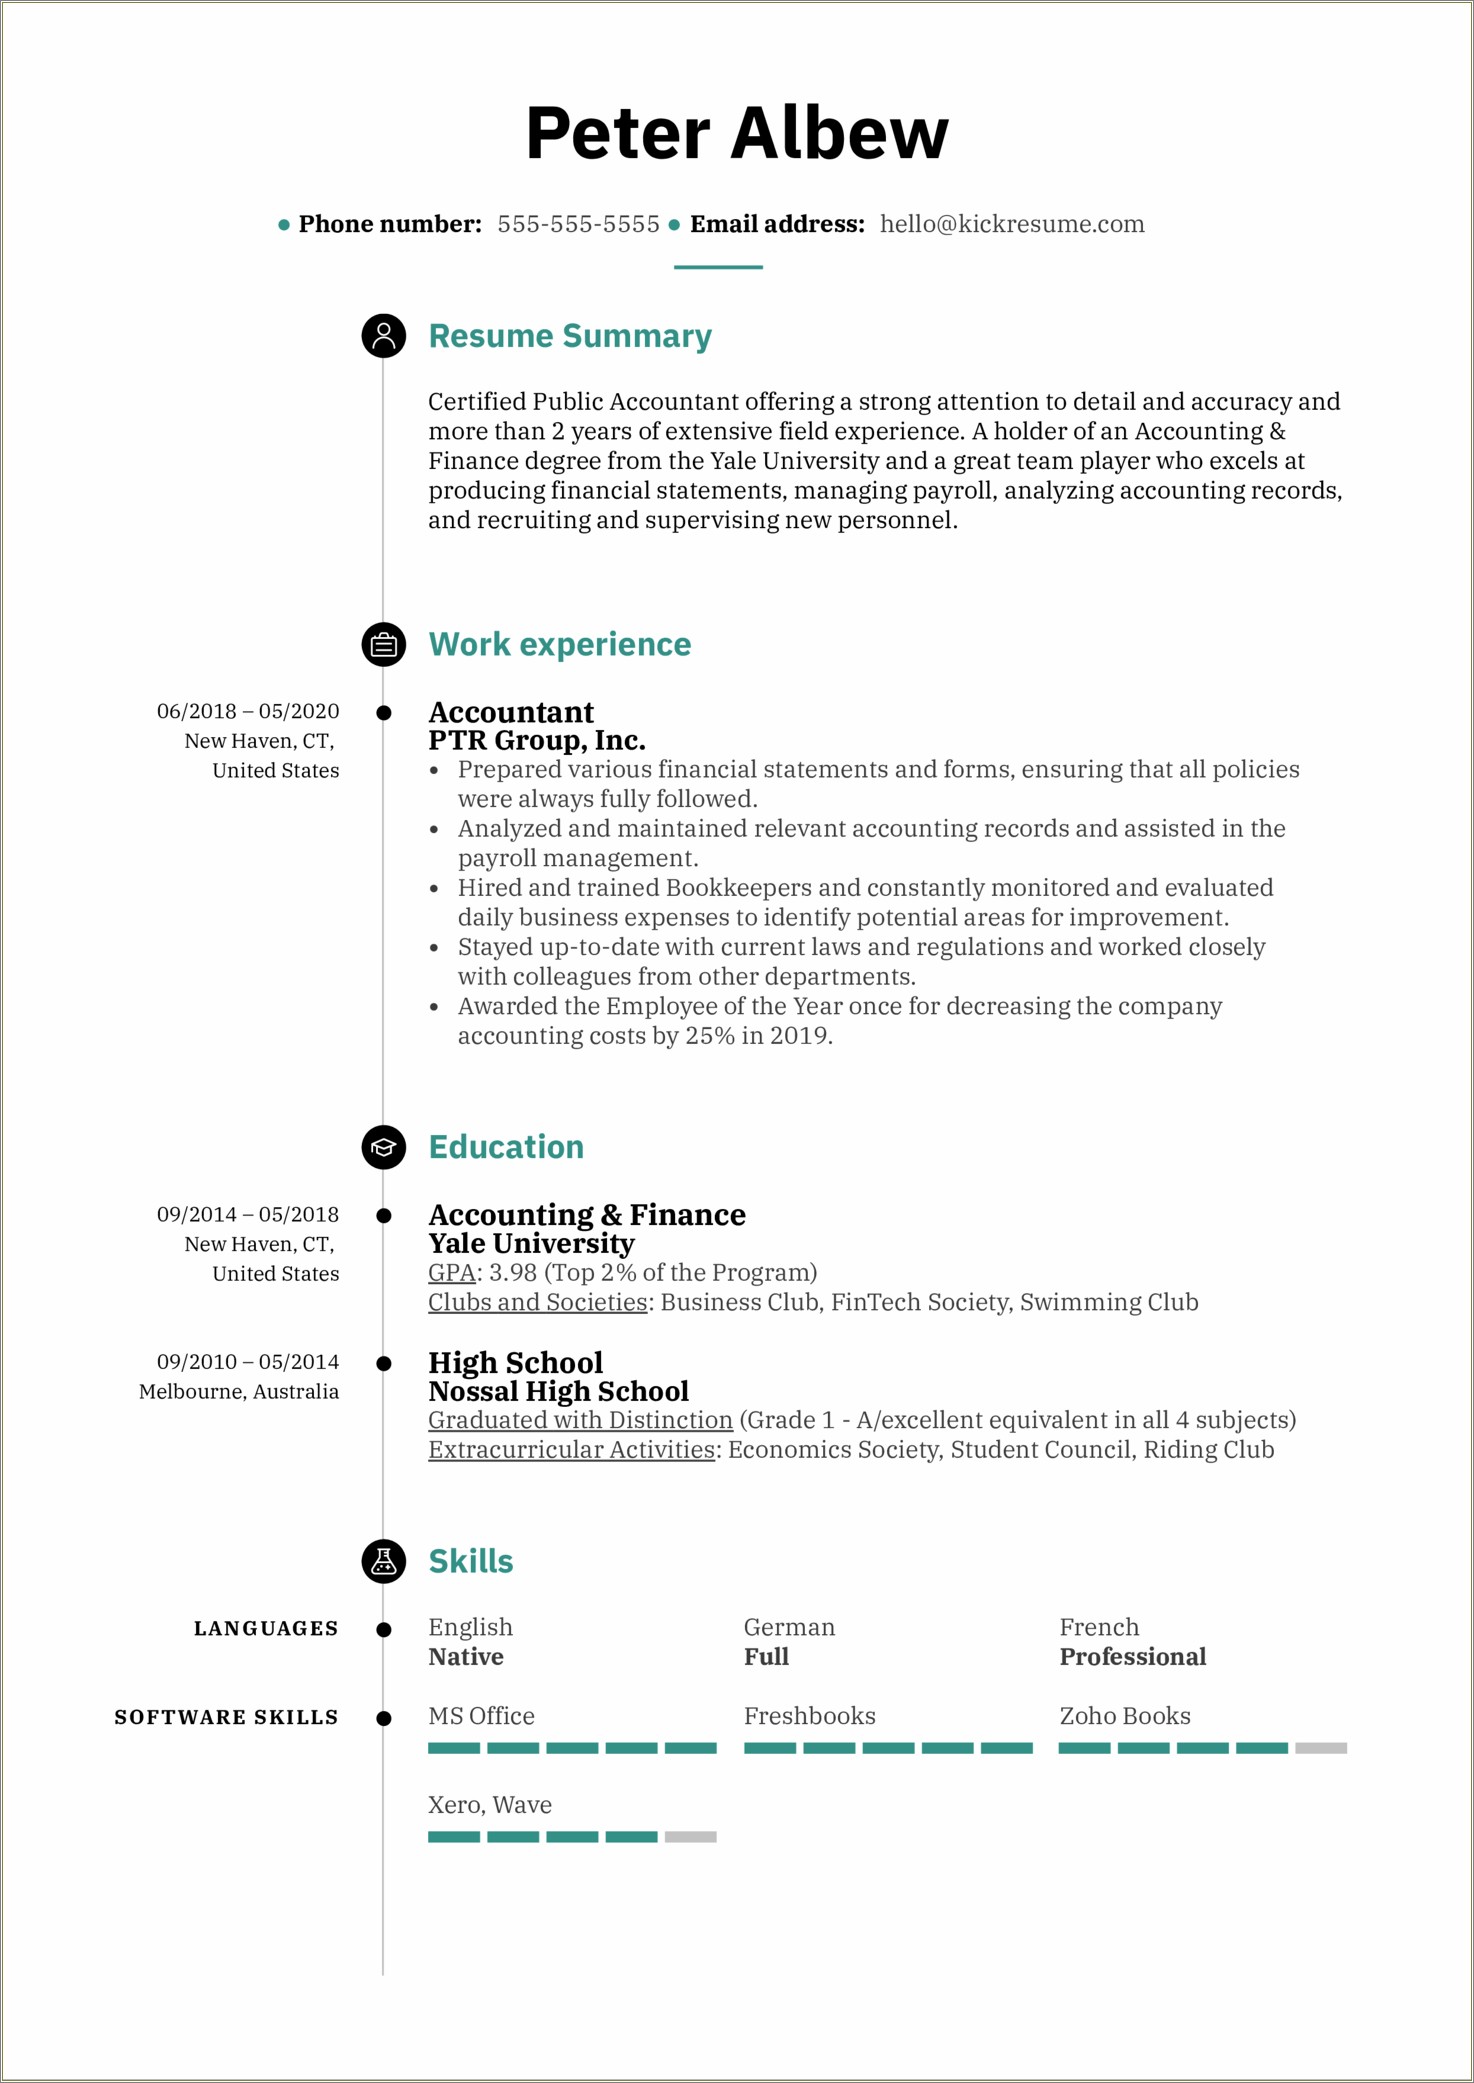 Samples Of Experience Summary On Resume